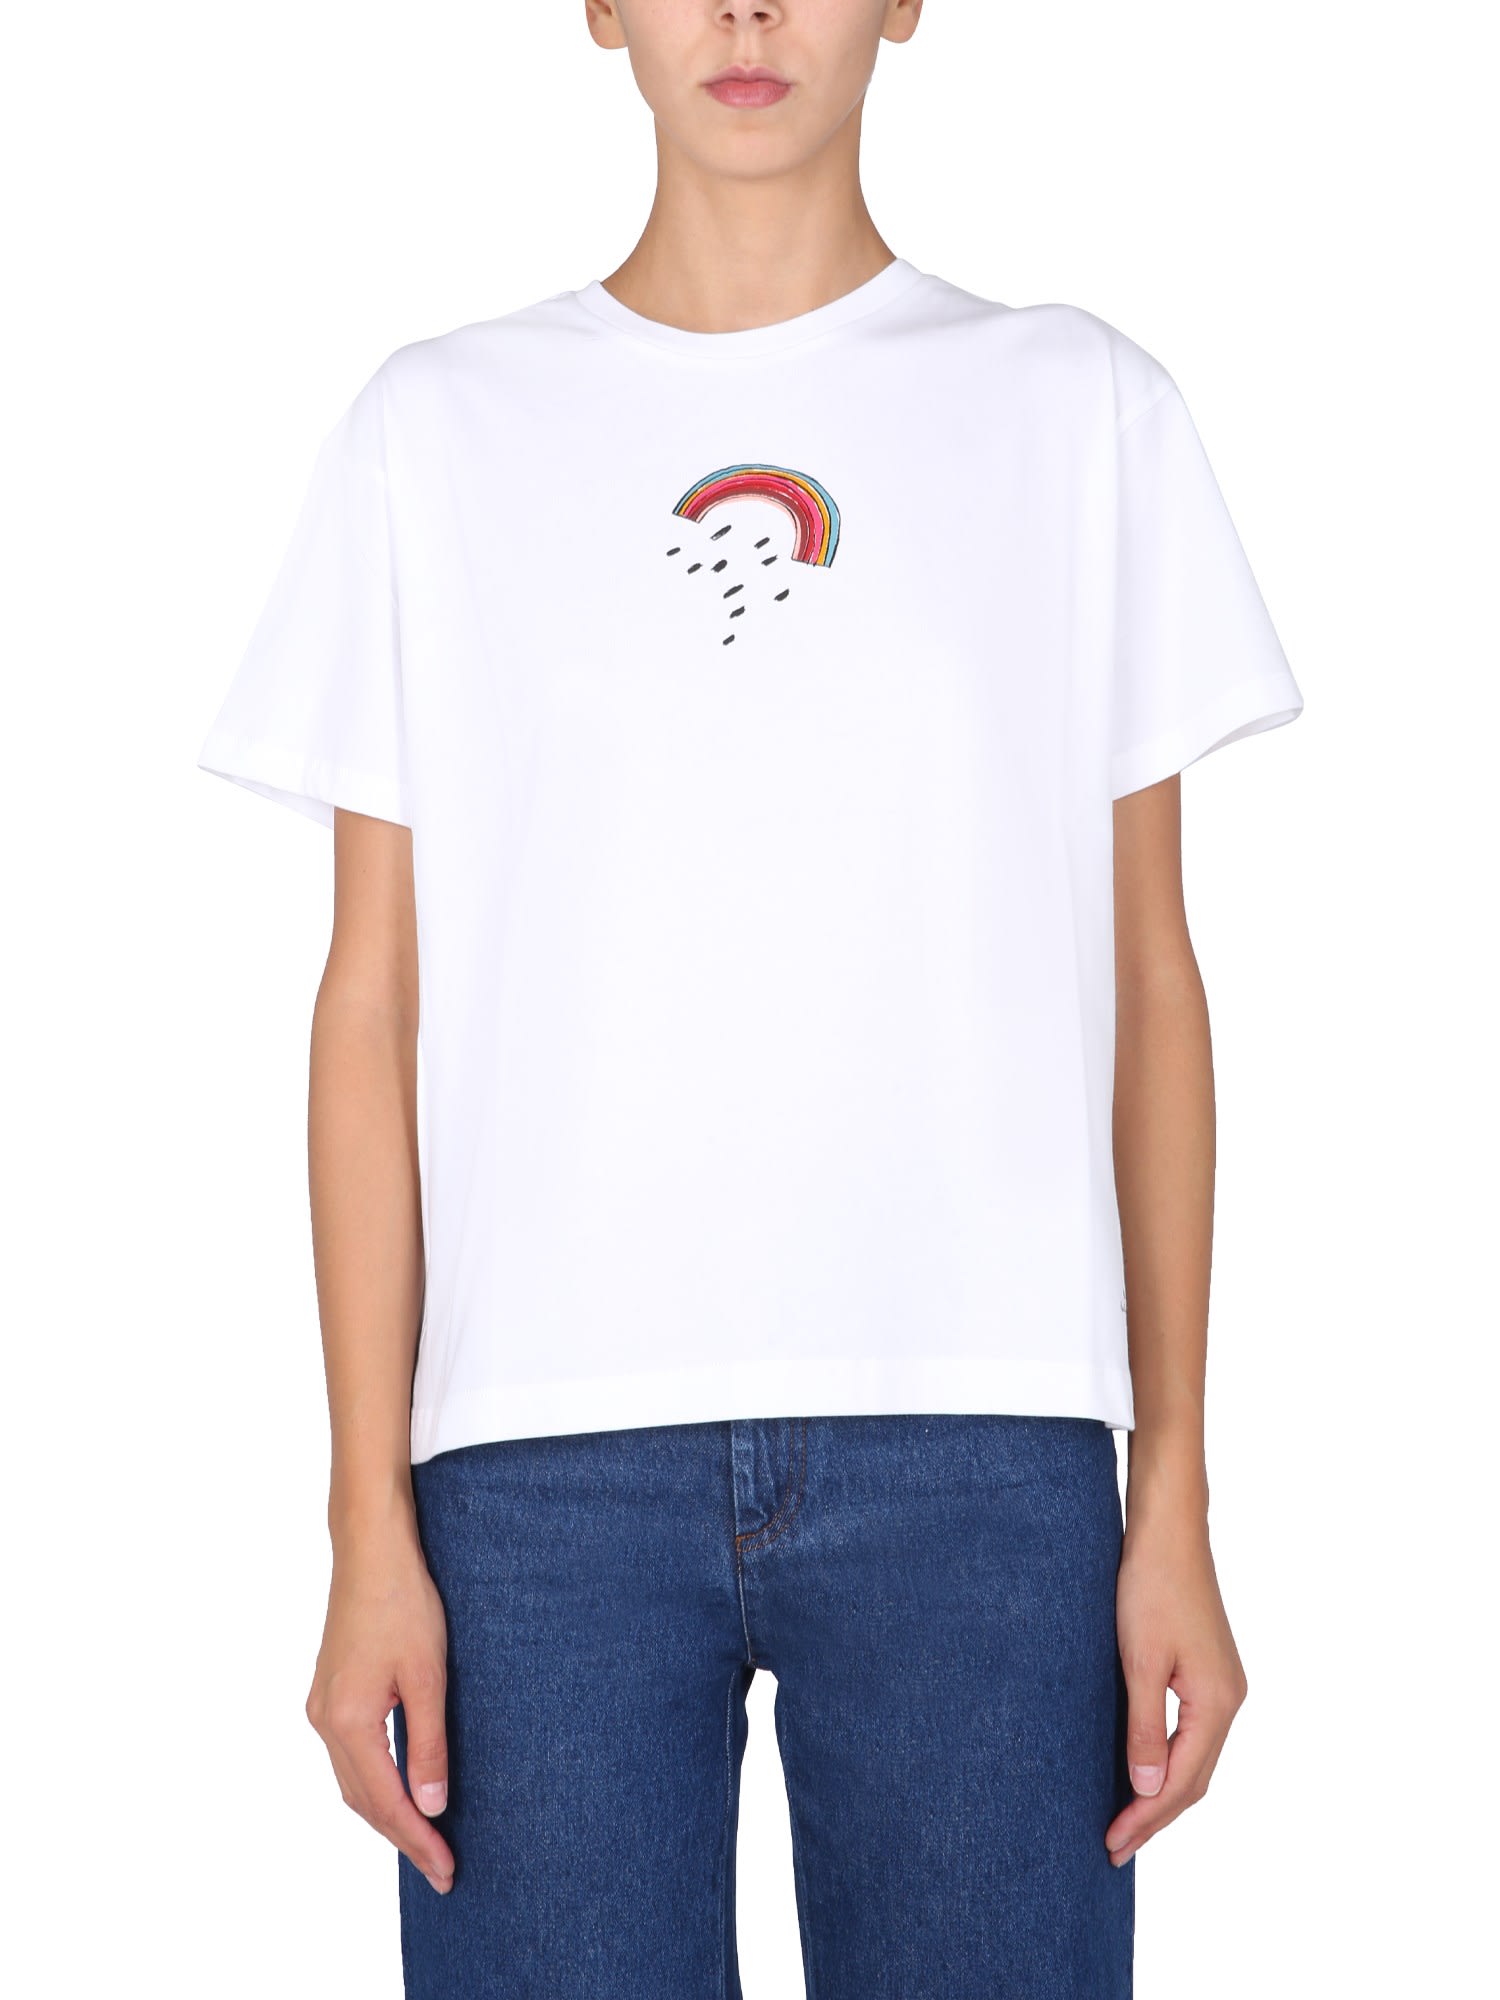 PS by Paul Smith Rainbow Doodle T-shirt